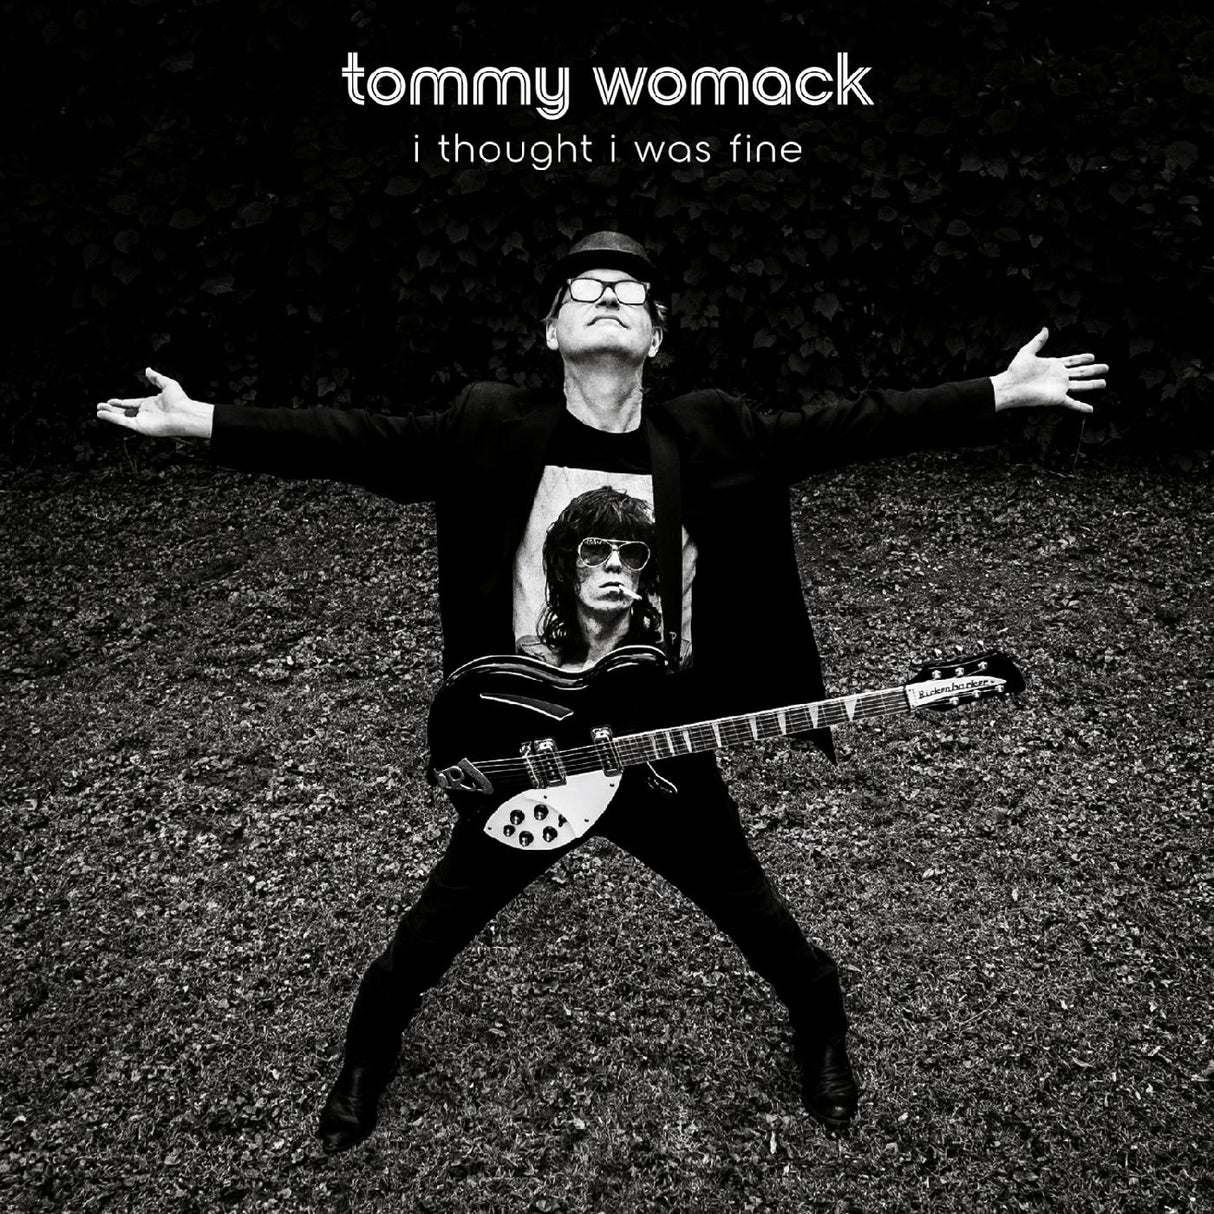 Tommy Womack - I Thought I Was Fine [Vinyl]